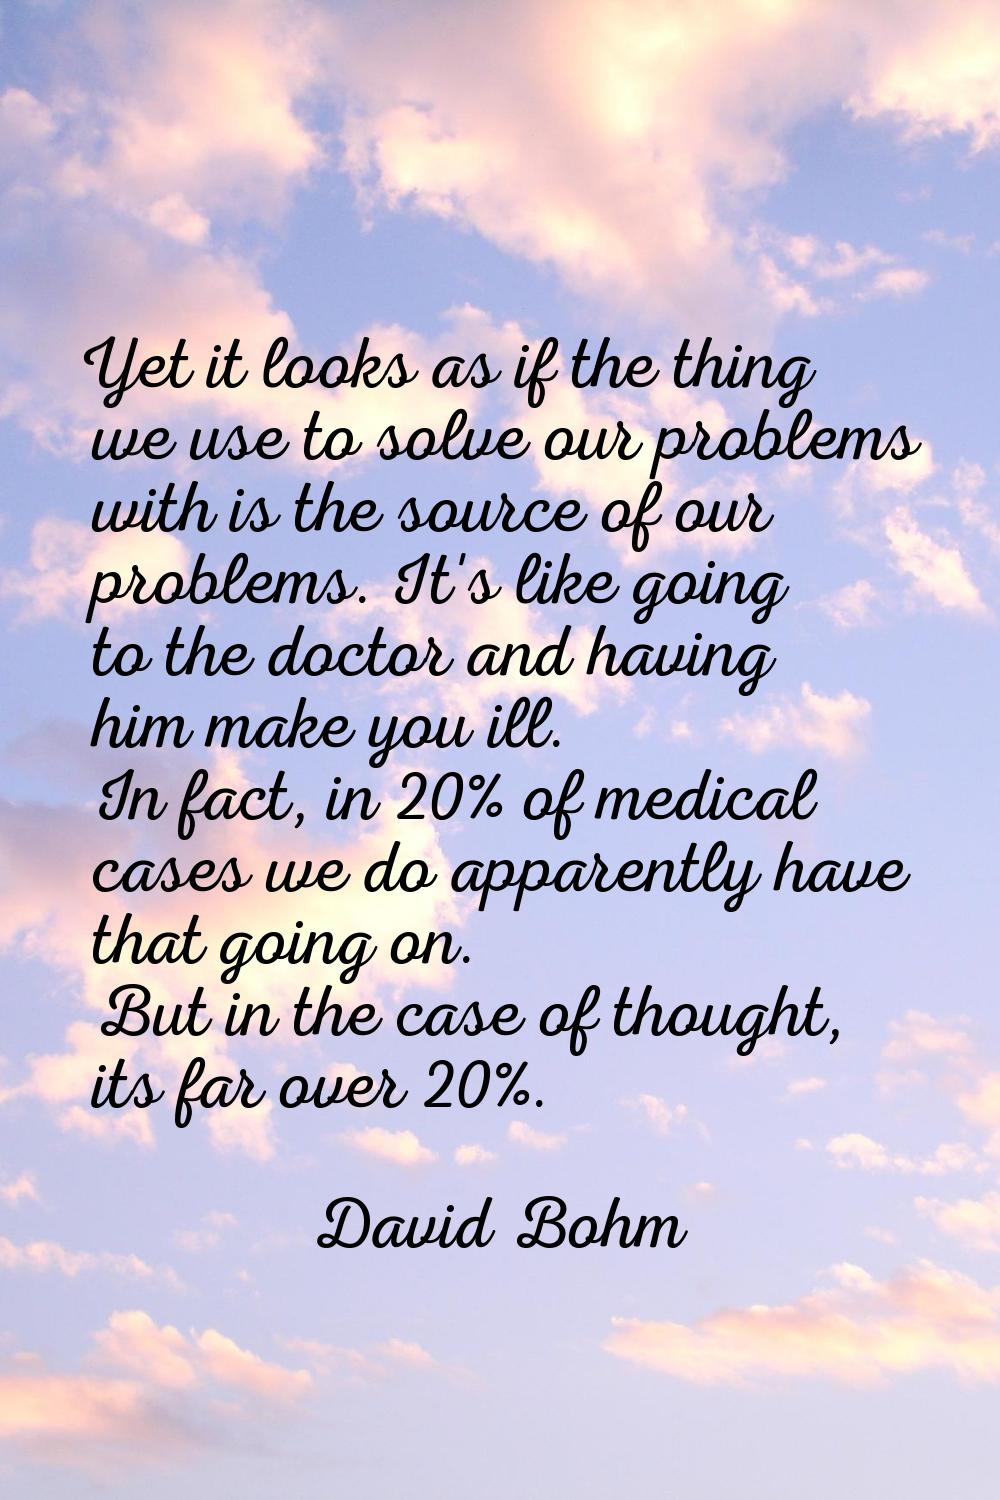 Yet it looks as if the thing we use to solve our problems with is the source of our problems. It's 